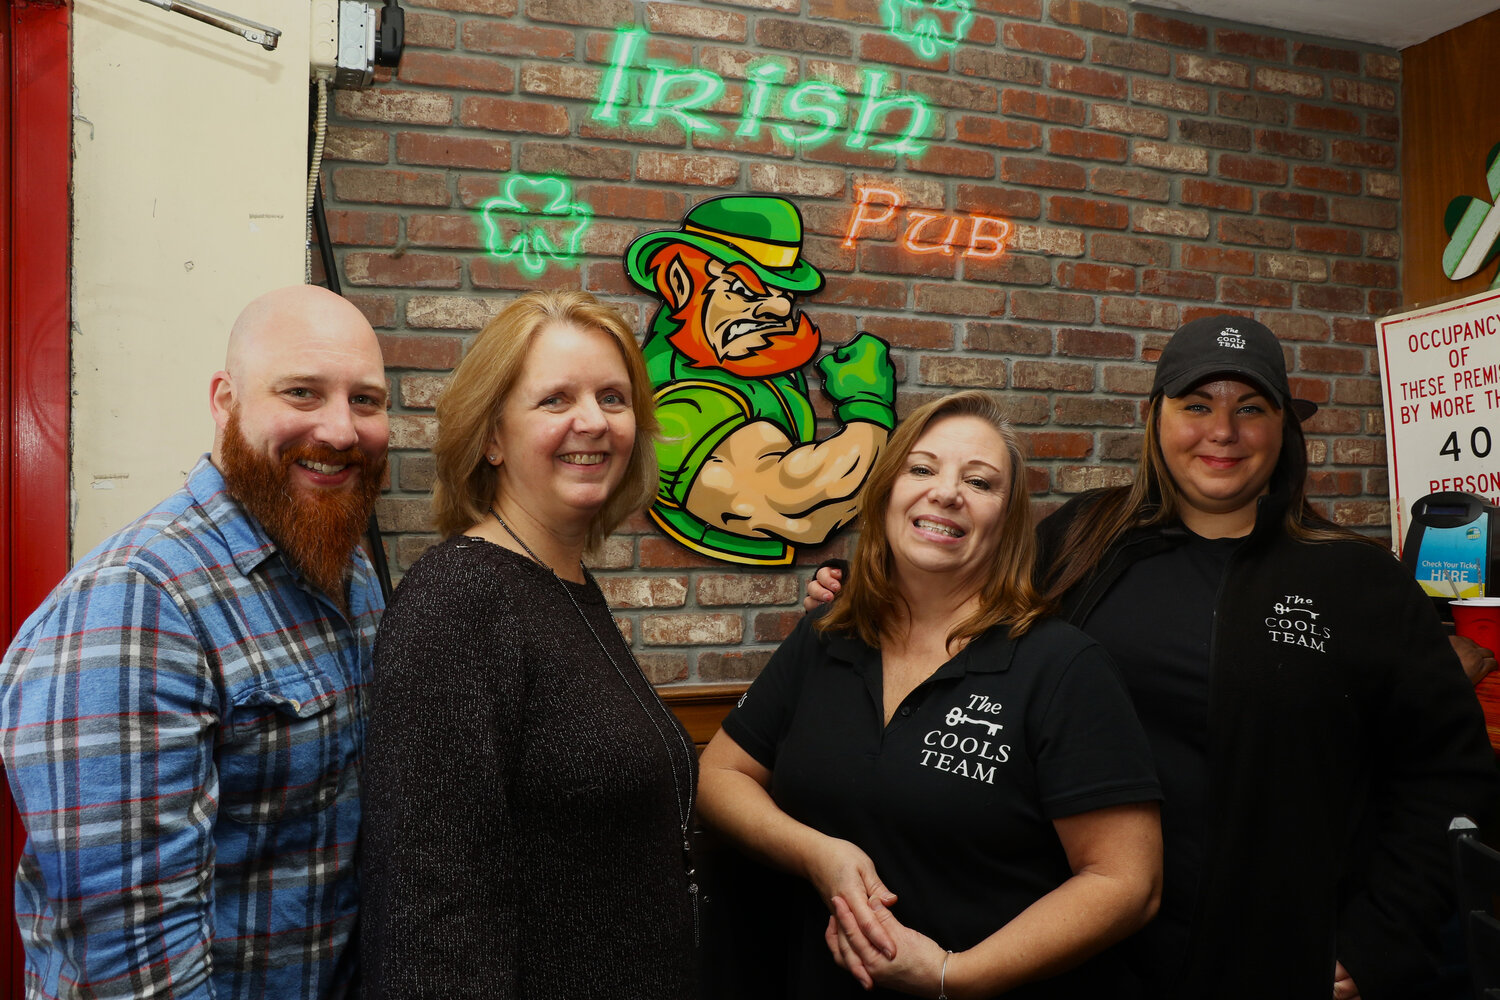 From left, Shawn Sabel, owner of the Irish Pub; Nassau County Legislator Debra Mule; Susan Cools, and Samantha Cools at the fifth annual Chili Cook-Off, which was hosted by the Cools’.